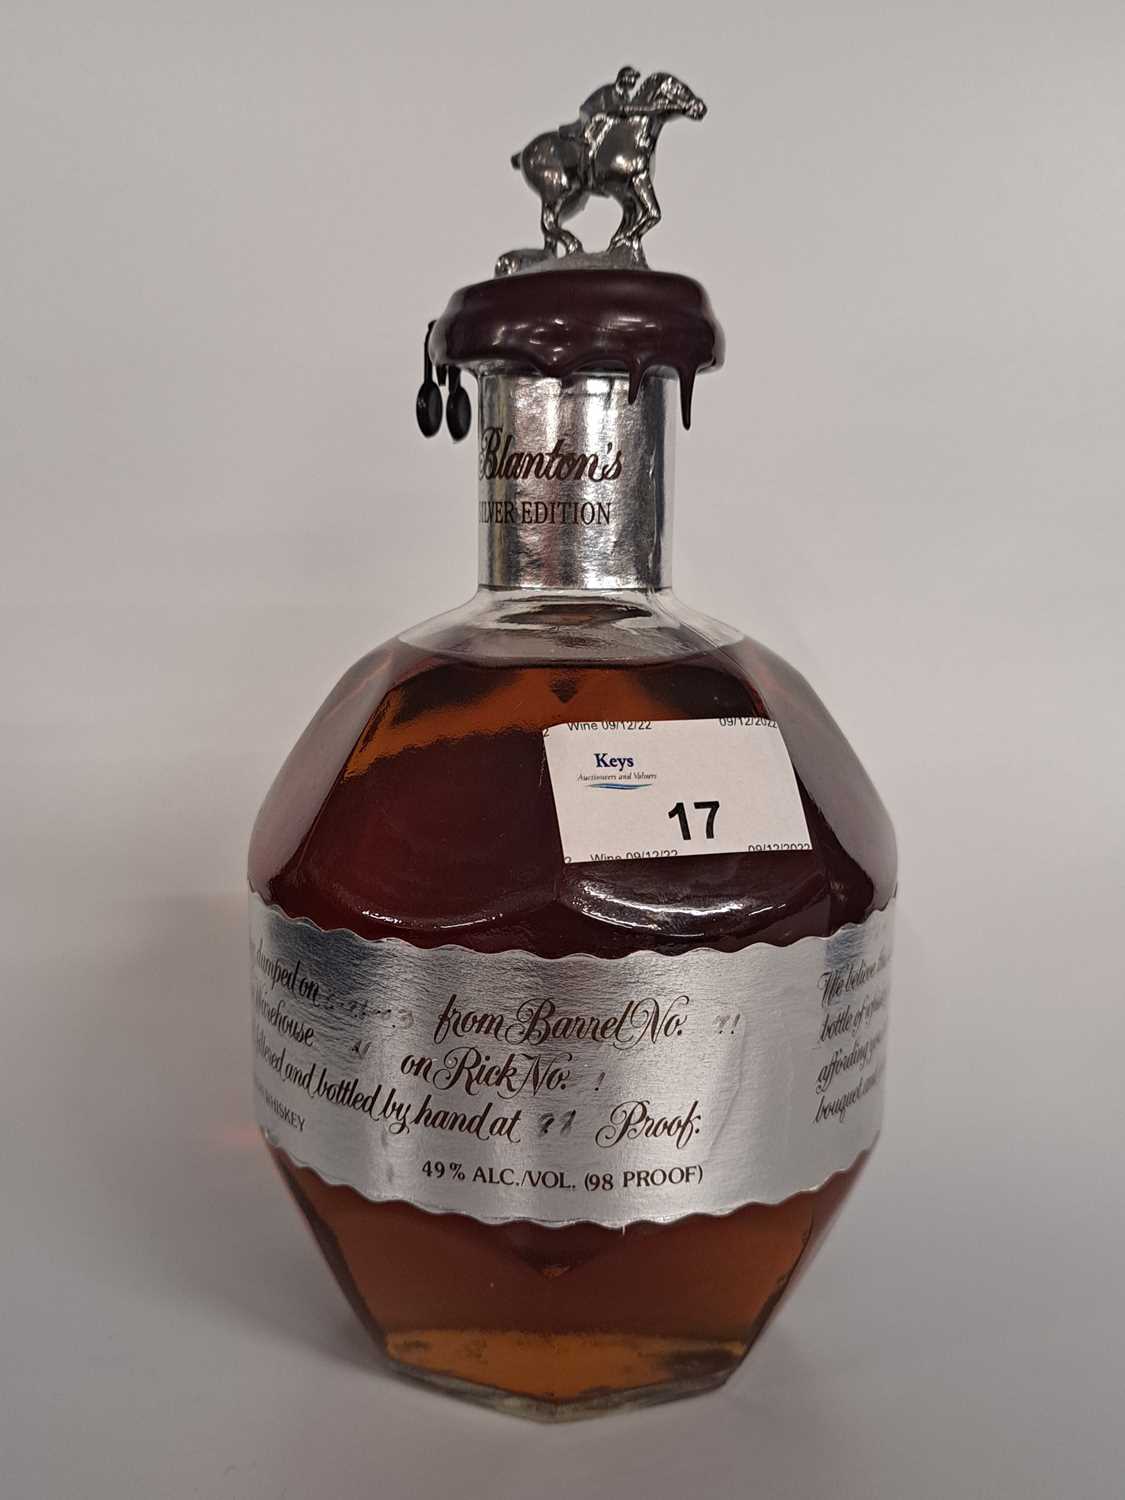 Blanton Silver Edition Bourbon Whiskey - Racehorse, from Barrel No: 71, 49% (98 Proof) Registered